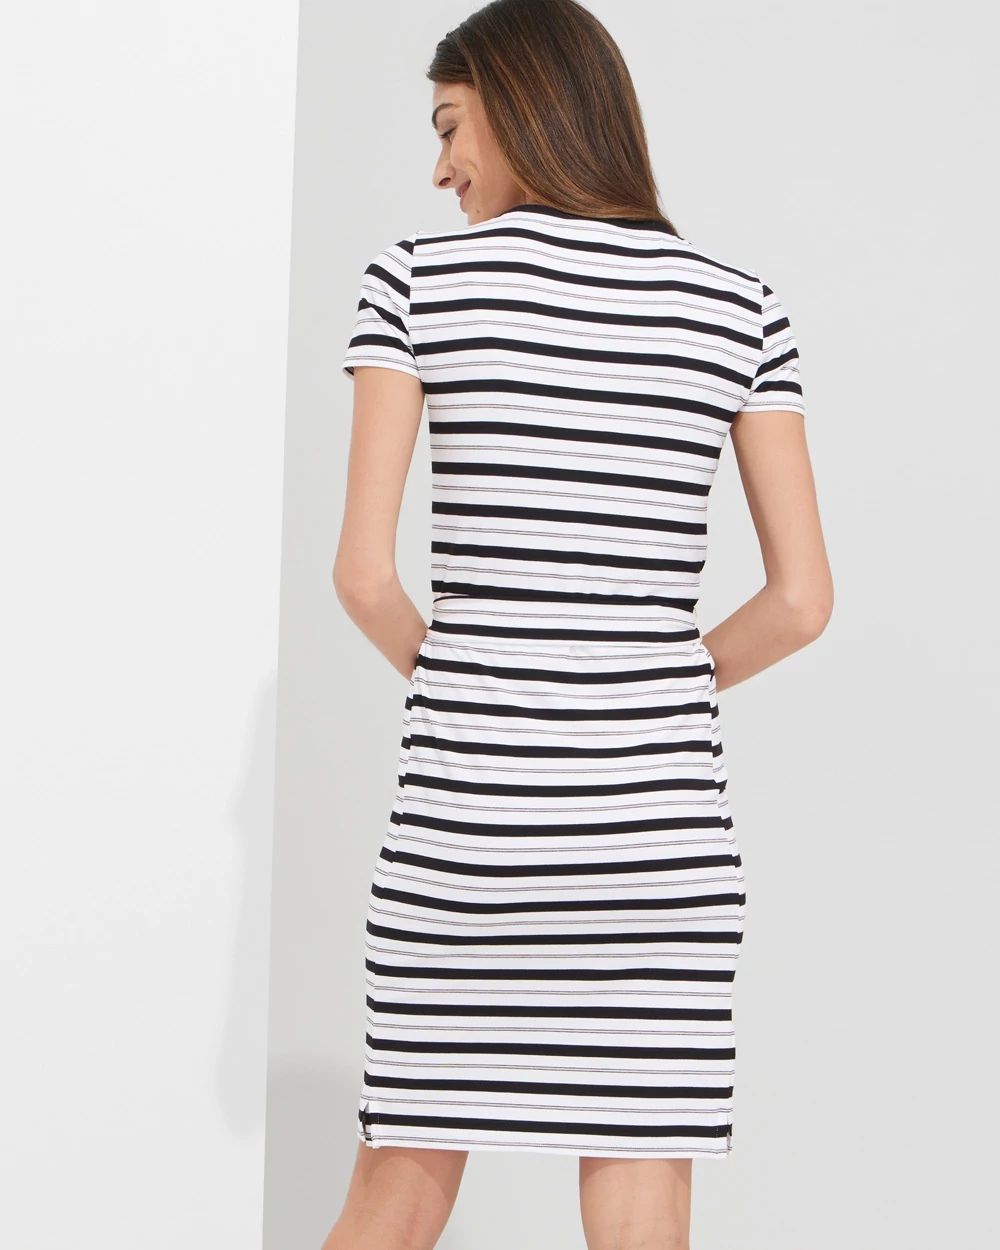 Outlet WHBM T-Shirt Dress click to view larger image.